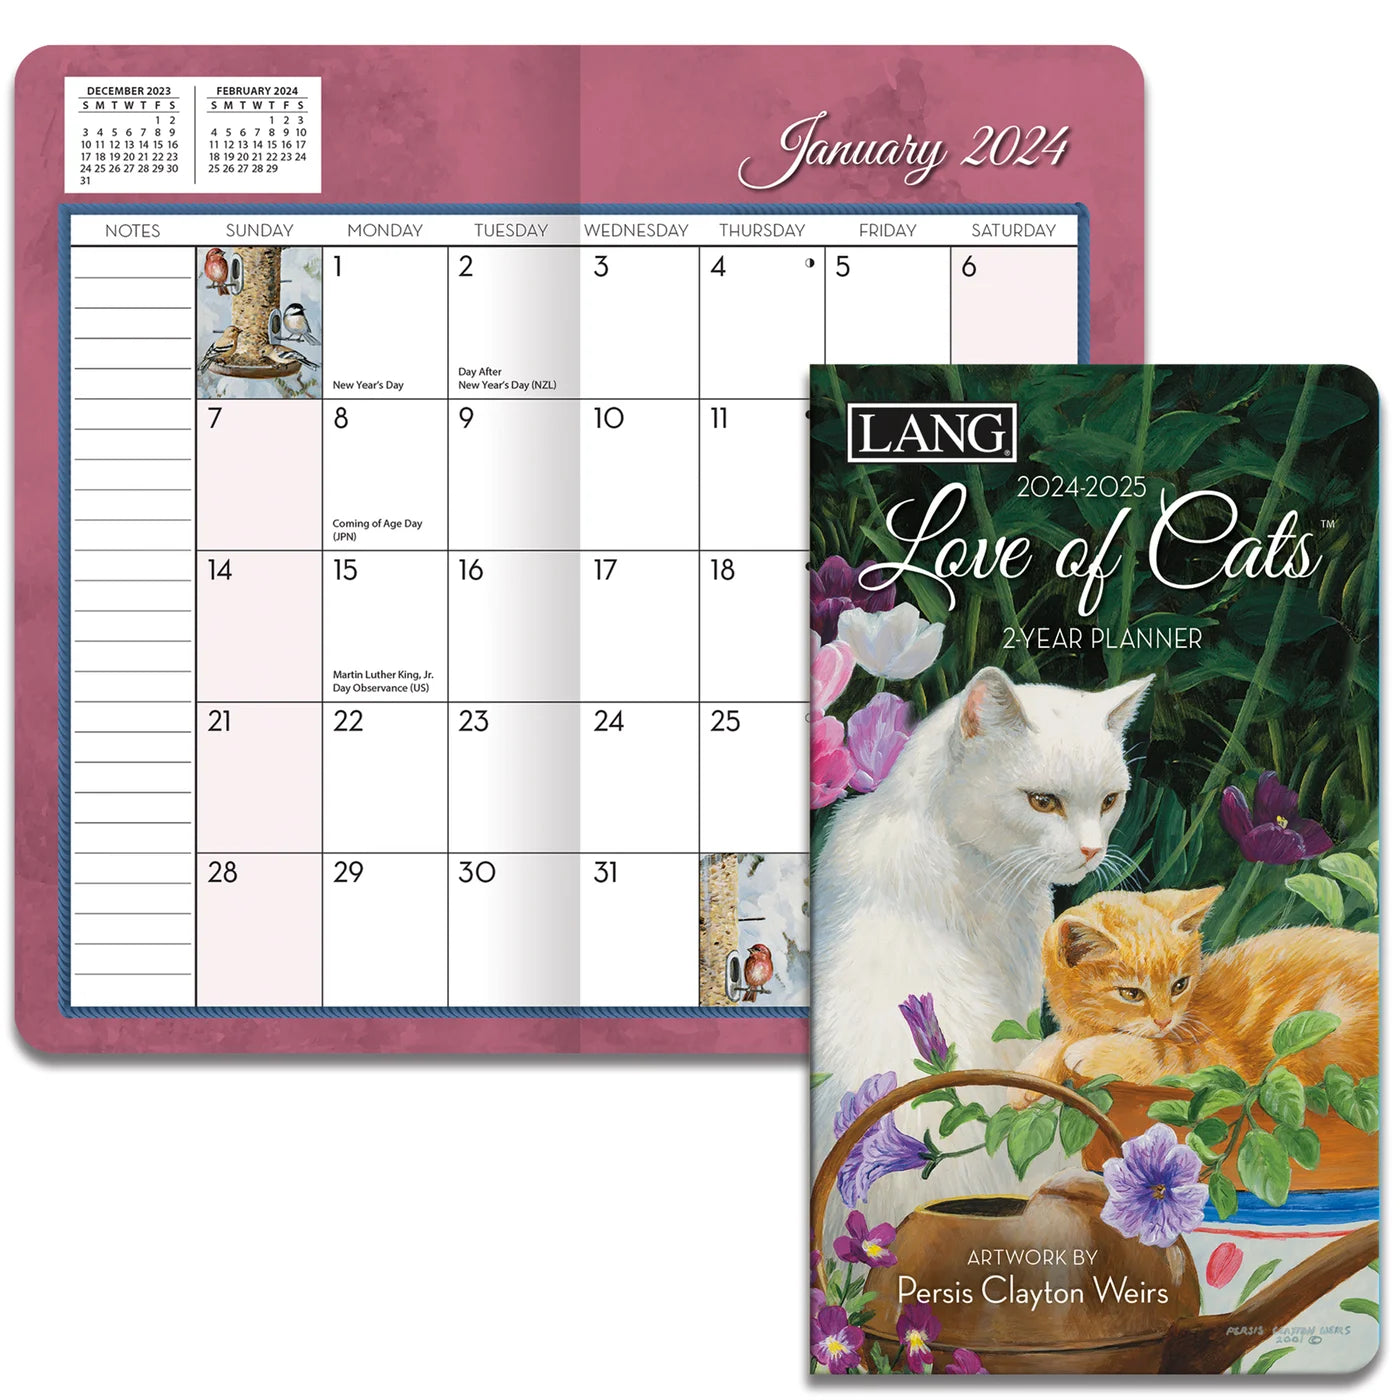 2024-2025 LANG Love Of Cats - 2 Year Pocket Diary/Planner